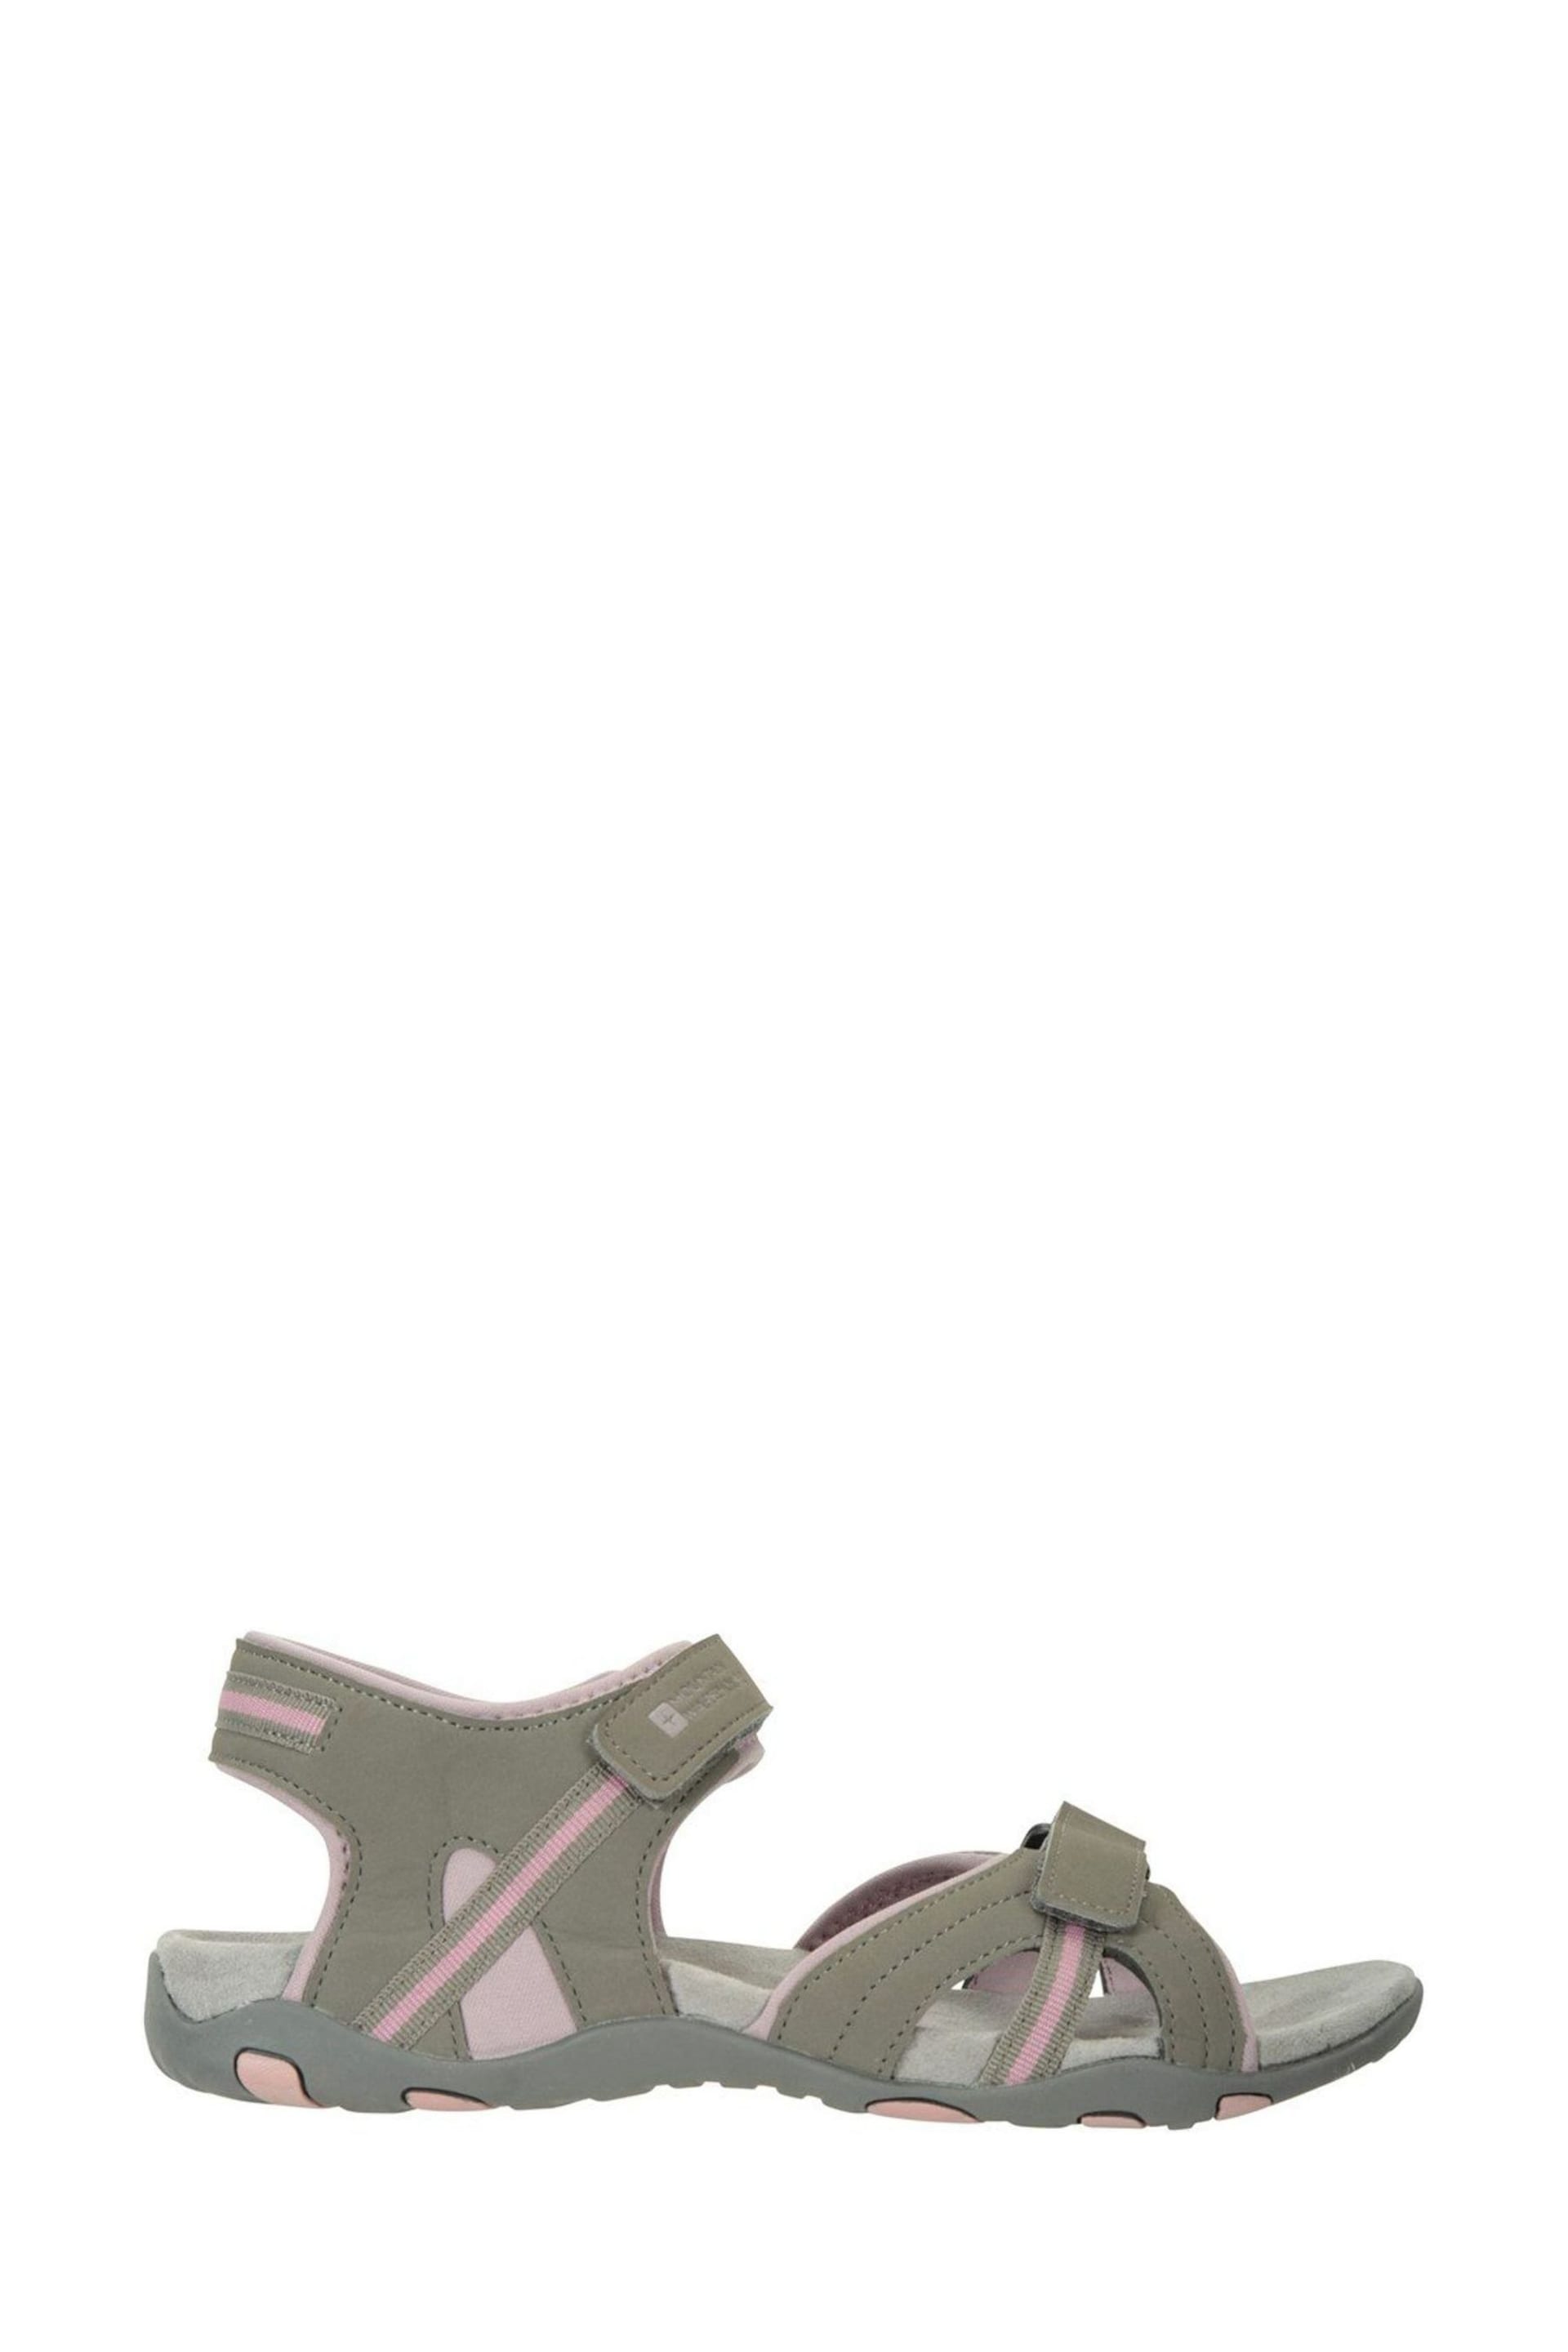 Mountain Warehouse Pink Womens Oia Summer Walking Sandals - Image 2 of 4